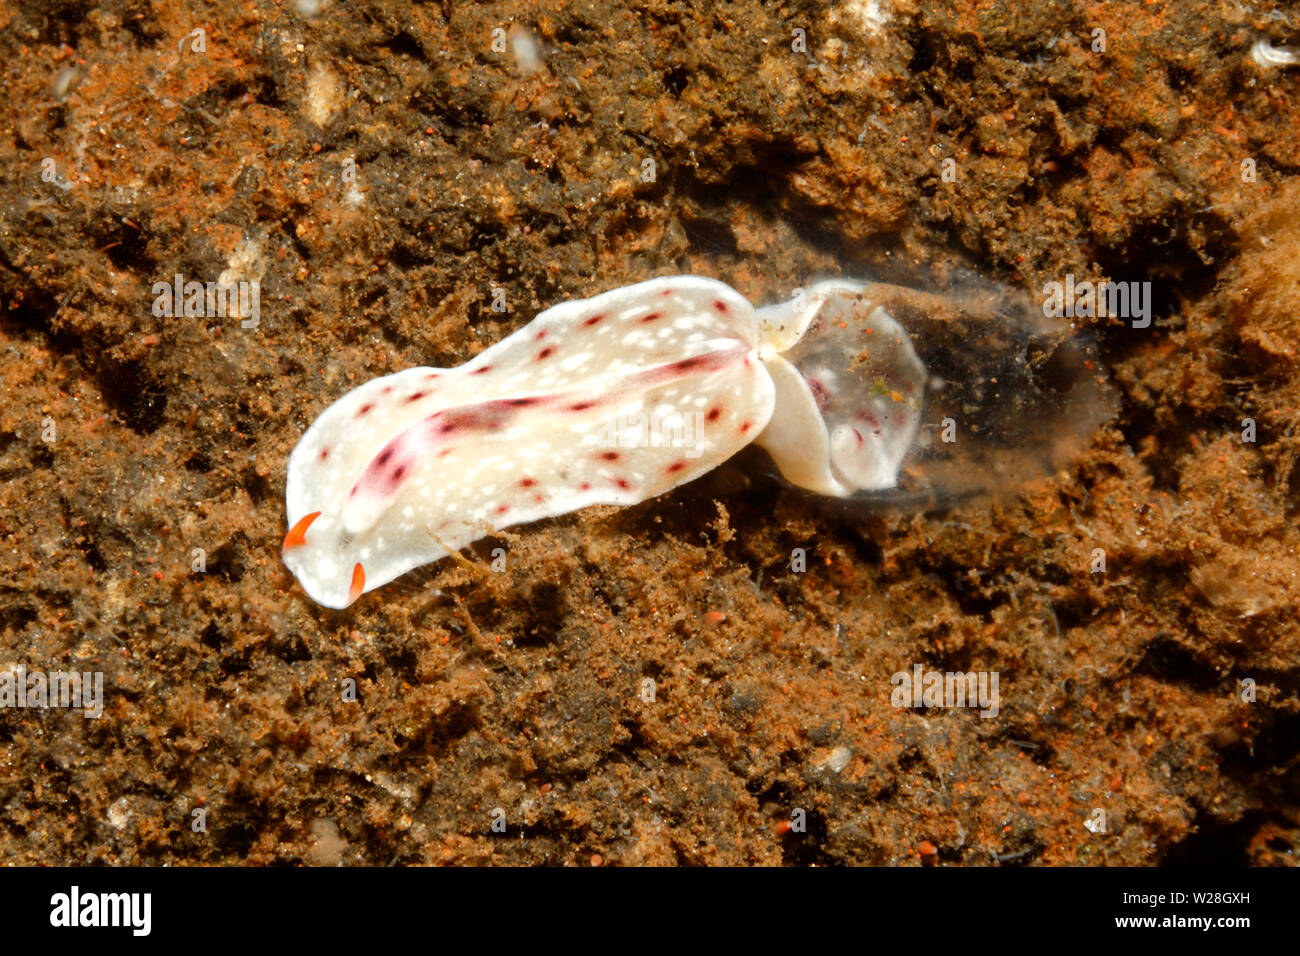 Marine Flatworm, Eurylepta sp. Possibly Eurylepta leoparda.This flatworm as been living inside its food ascidian while eating the flesh. Stock Photo